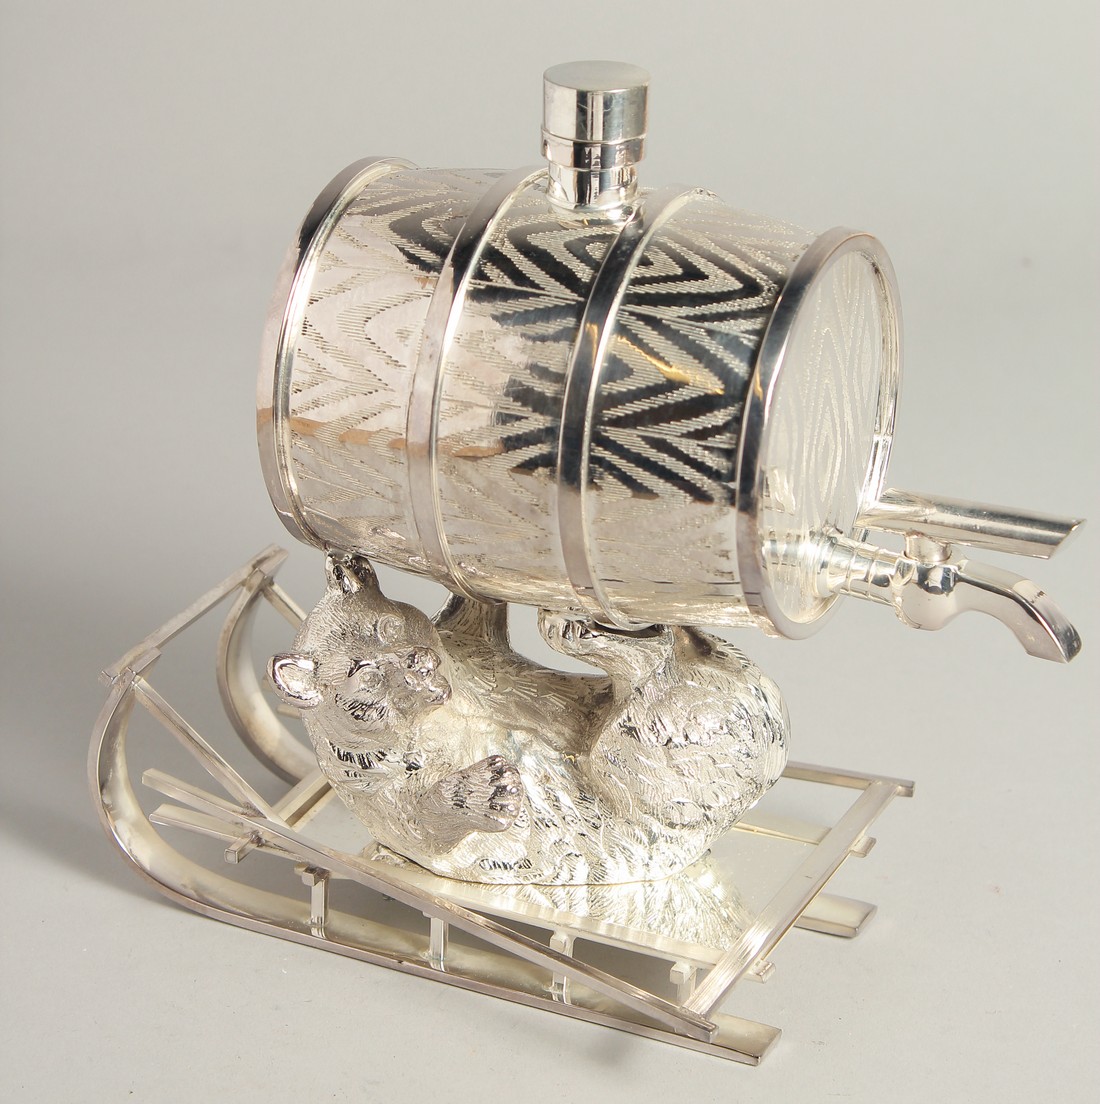 A SILVER PLATED BARREL being held by a bear on a sleigh.